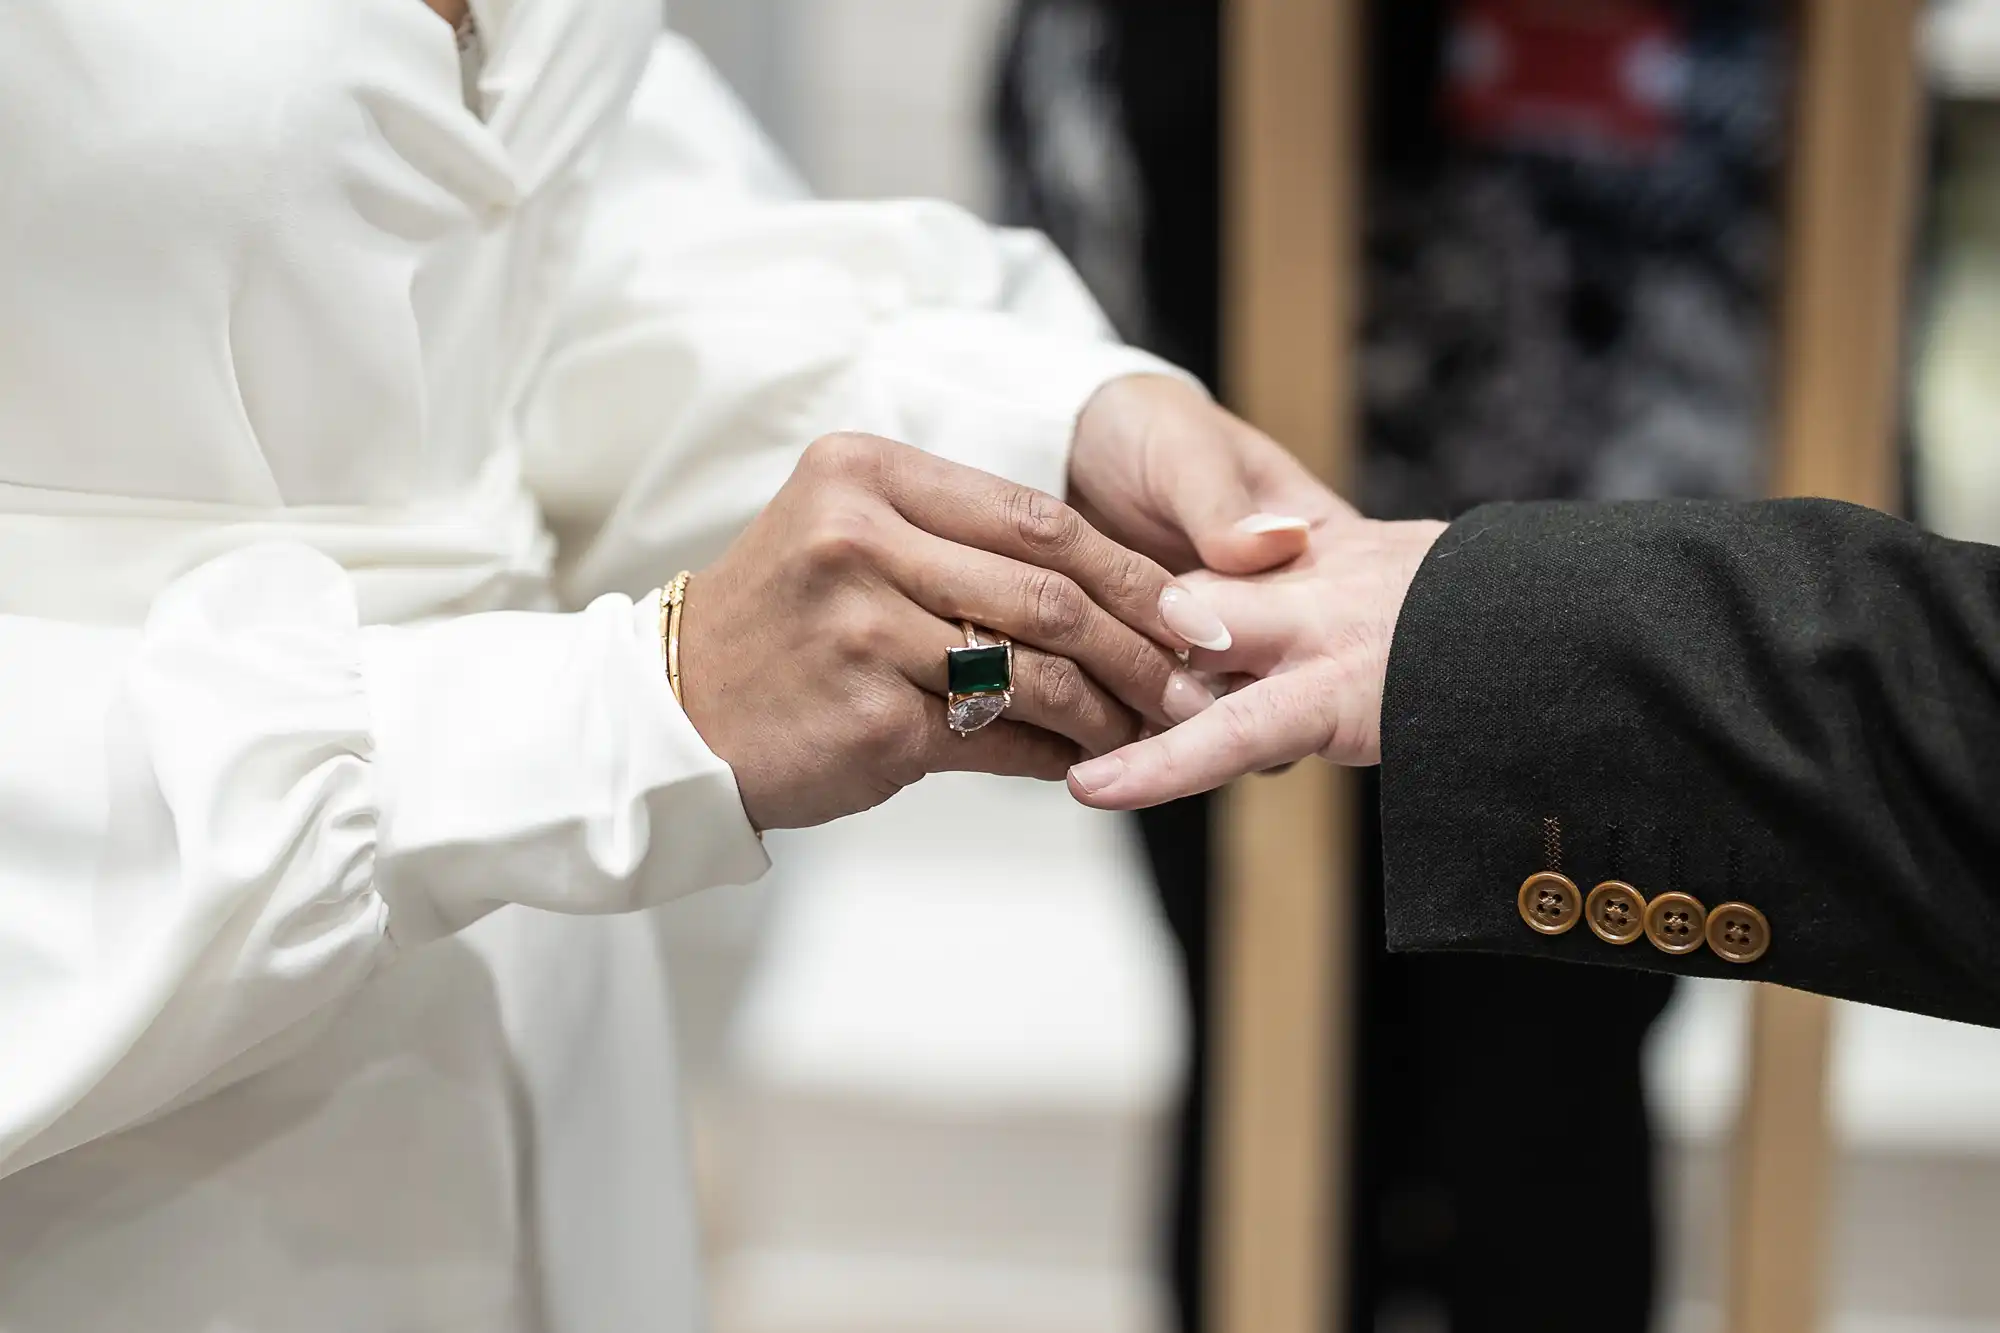 A person in a white garment places a ring on another person's finger, who is wearing a black suit jacket.